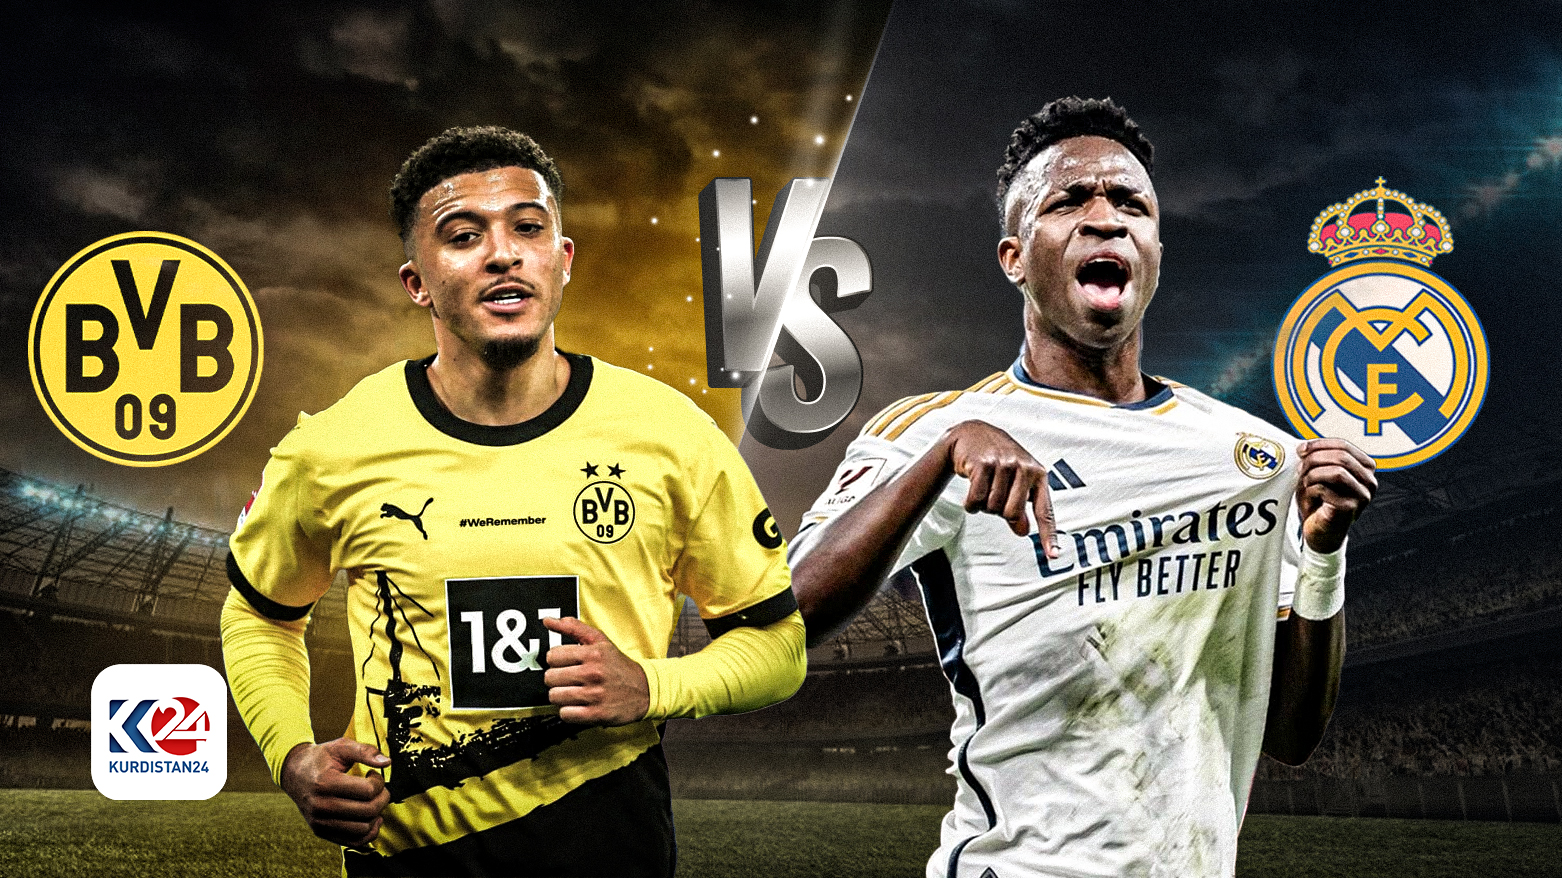 Dortmund to face Real Madrid in highly anticipated Champions League Final